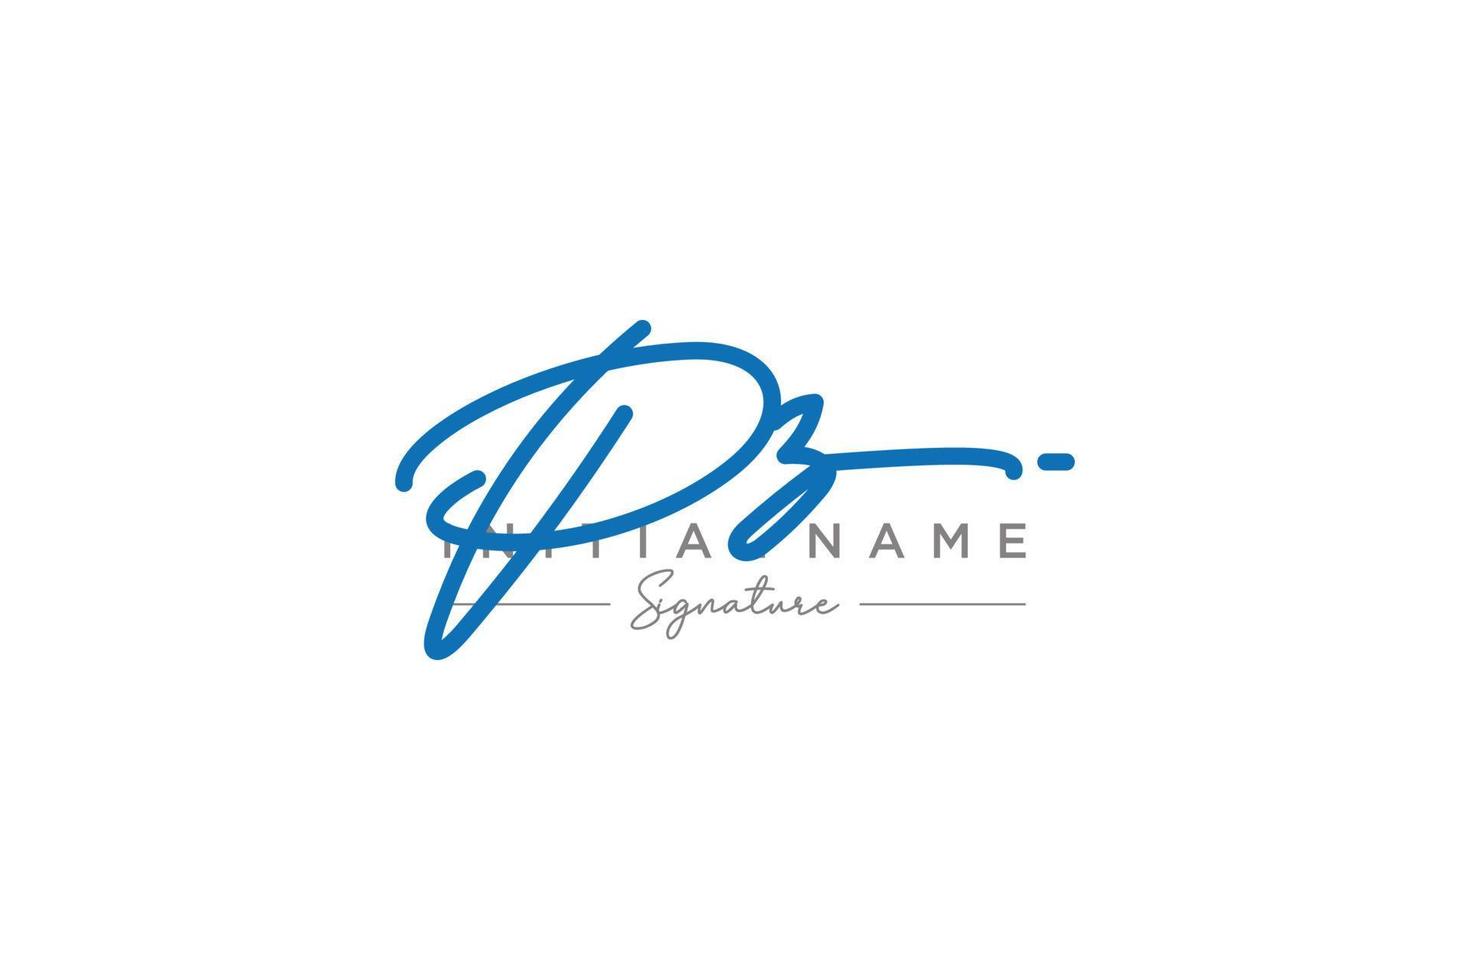 Initial PZ signature logo template vector. Hand drawn Calligraphy lettering Vector illustration.